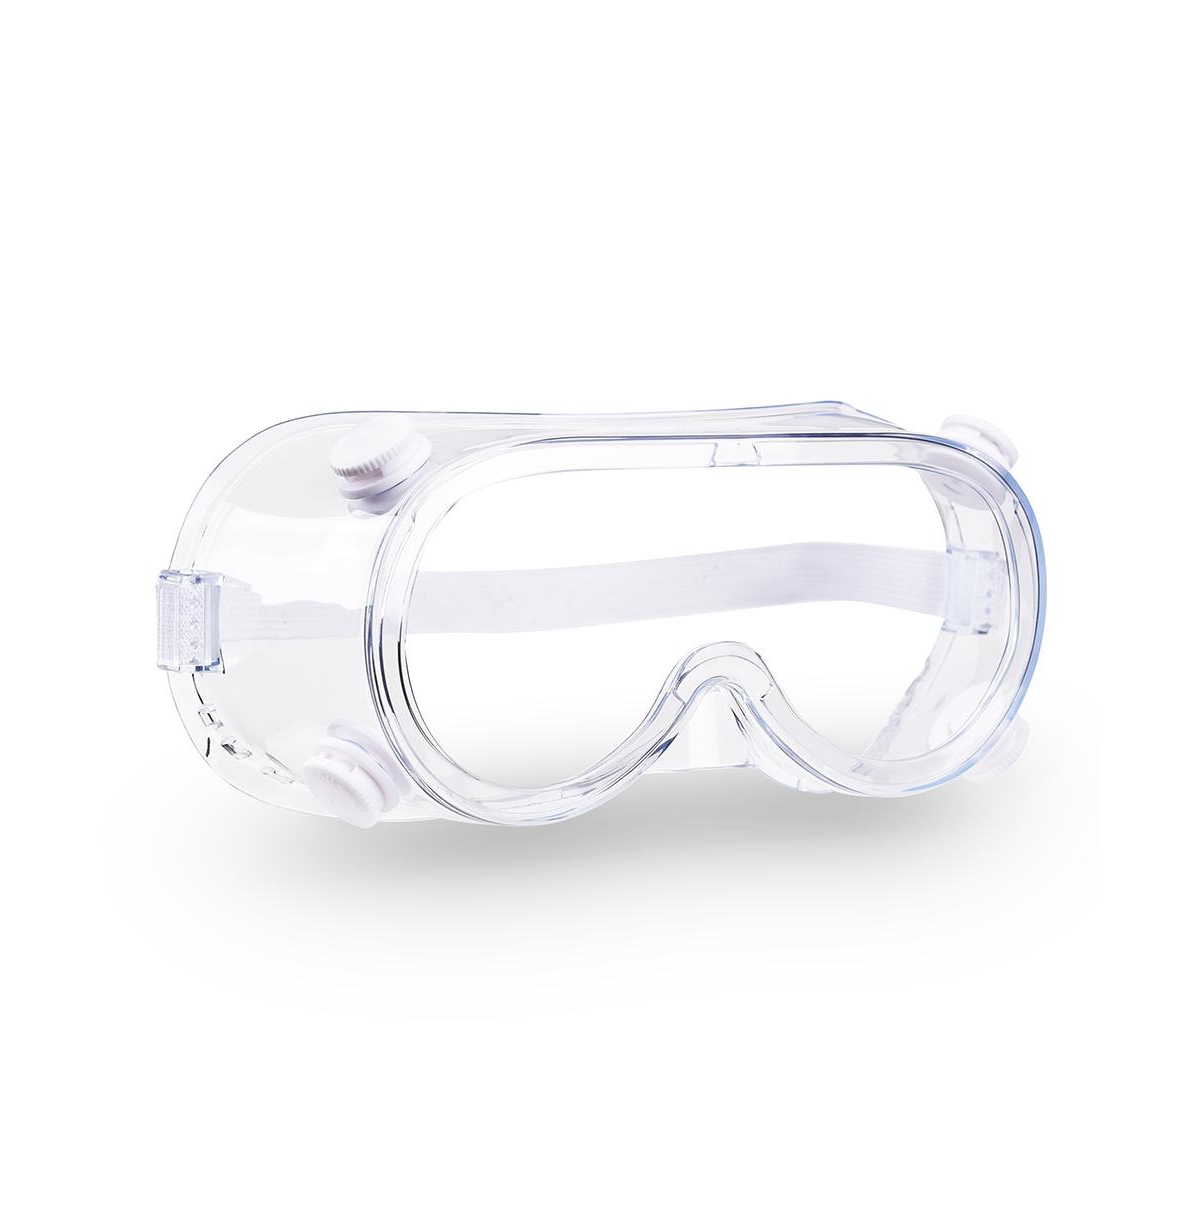 1 Pair Disposable Safety Goggles Glasses Anti Fog Protective Eyewear Clear Lens - White